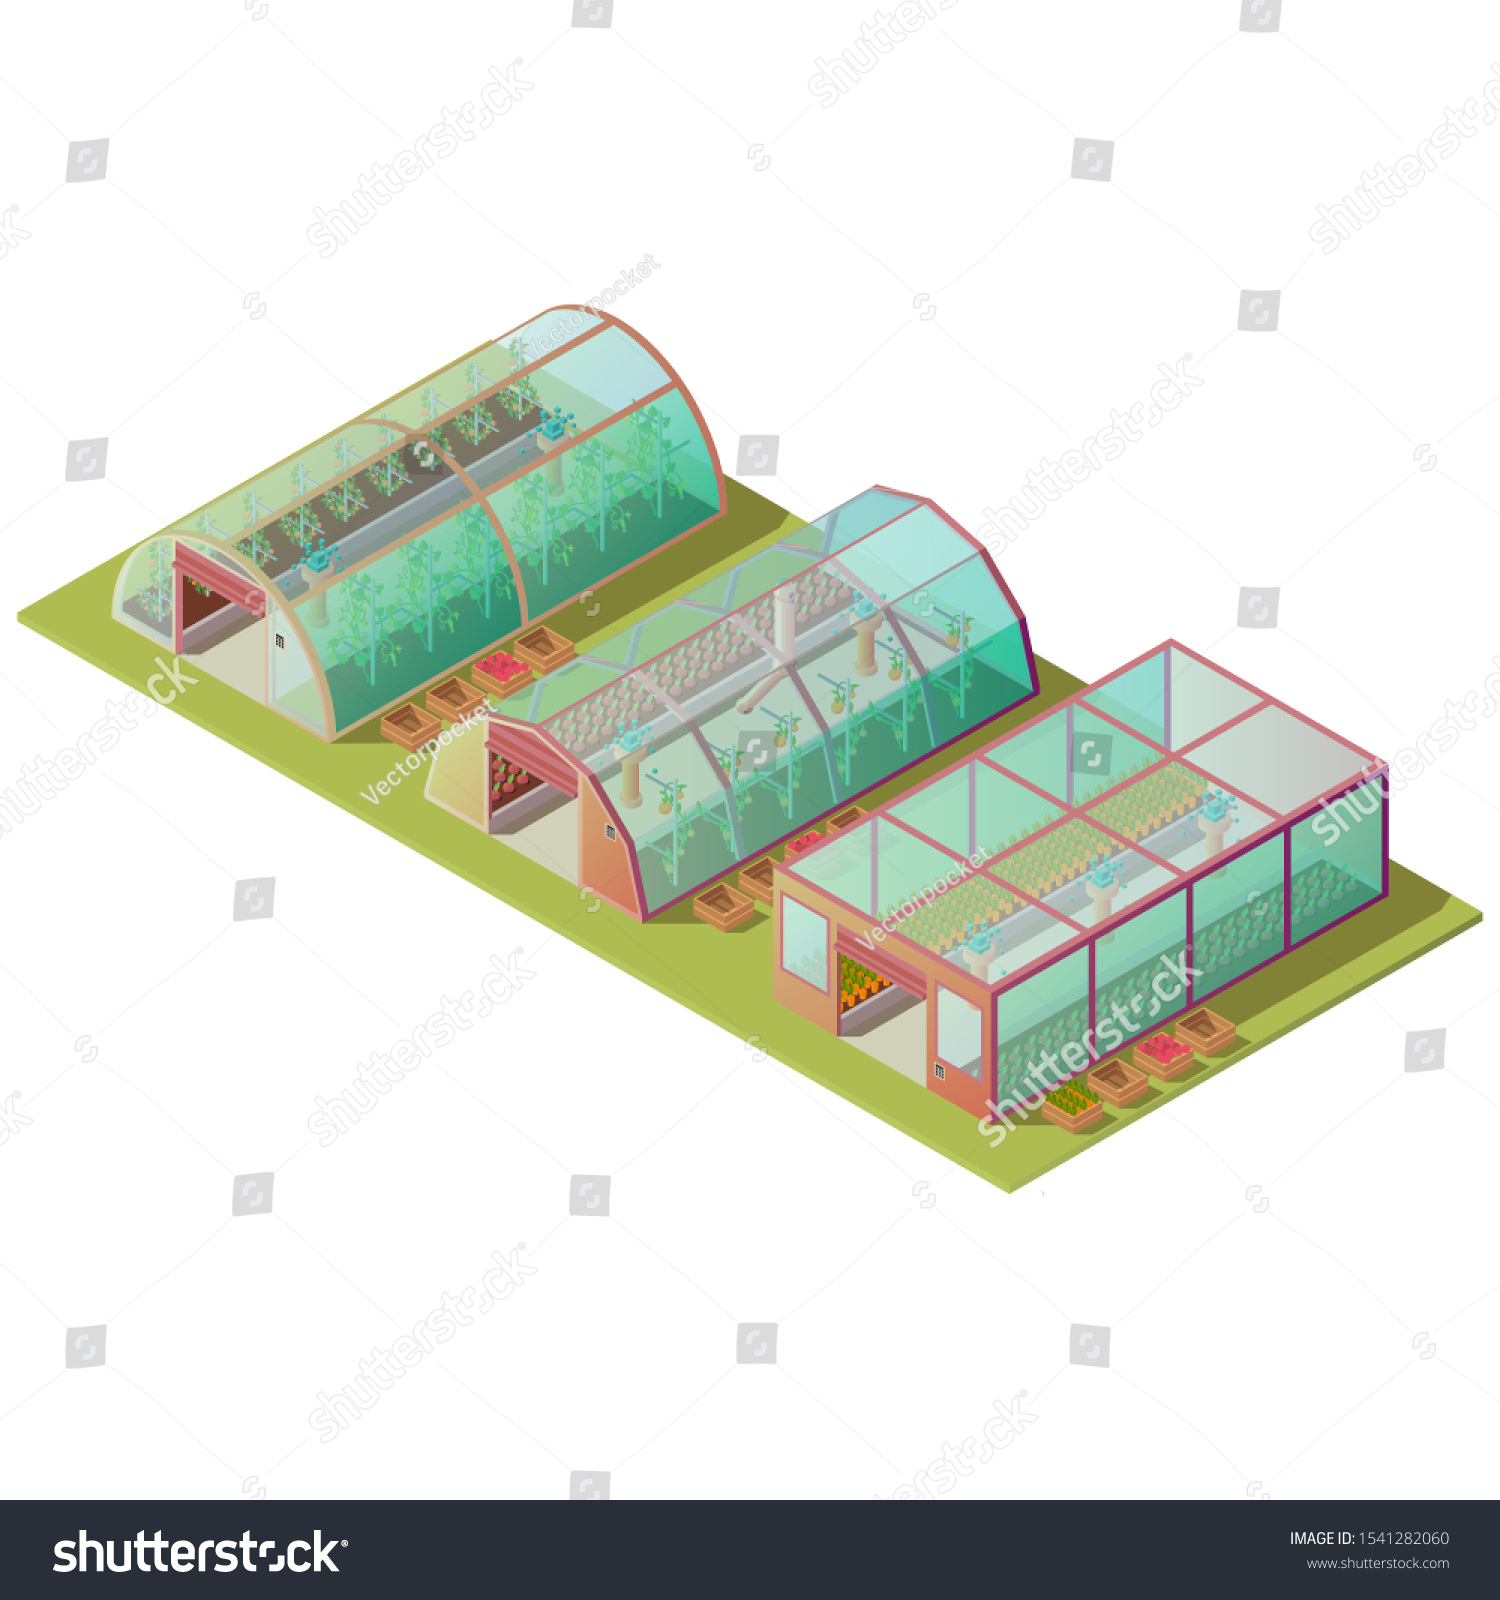 SVG of Isometric greenhouses set, farm hothouse buildings of different shapes for growing plants with glass windows and automatic lifting door isolated on white background. 3d vector illustration, clip art svg